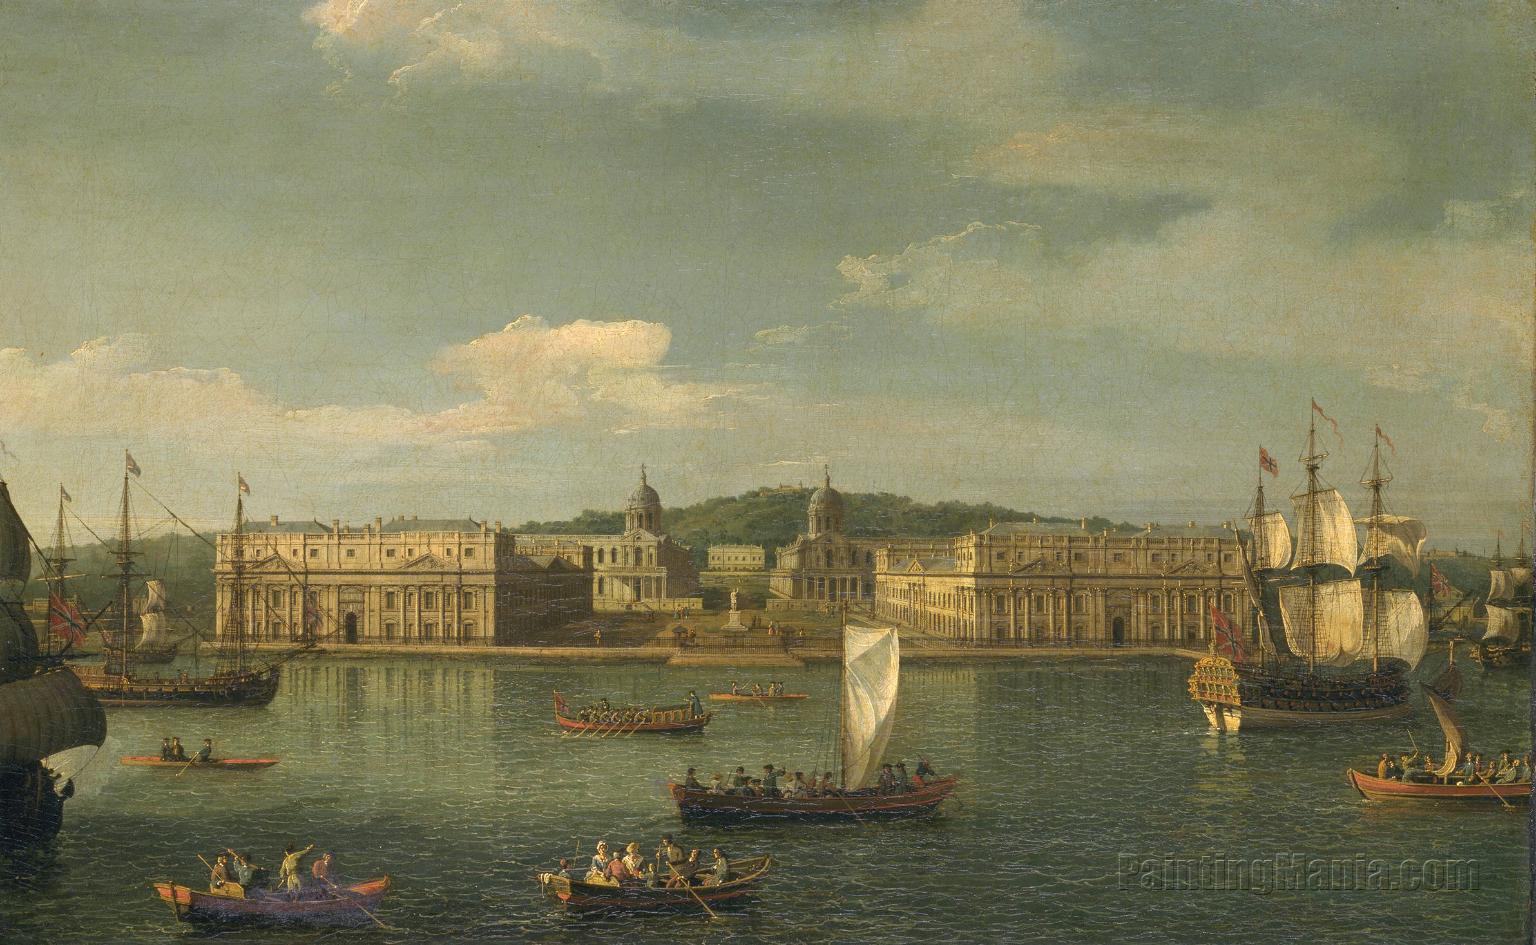 A View of Greenwich from the River